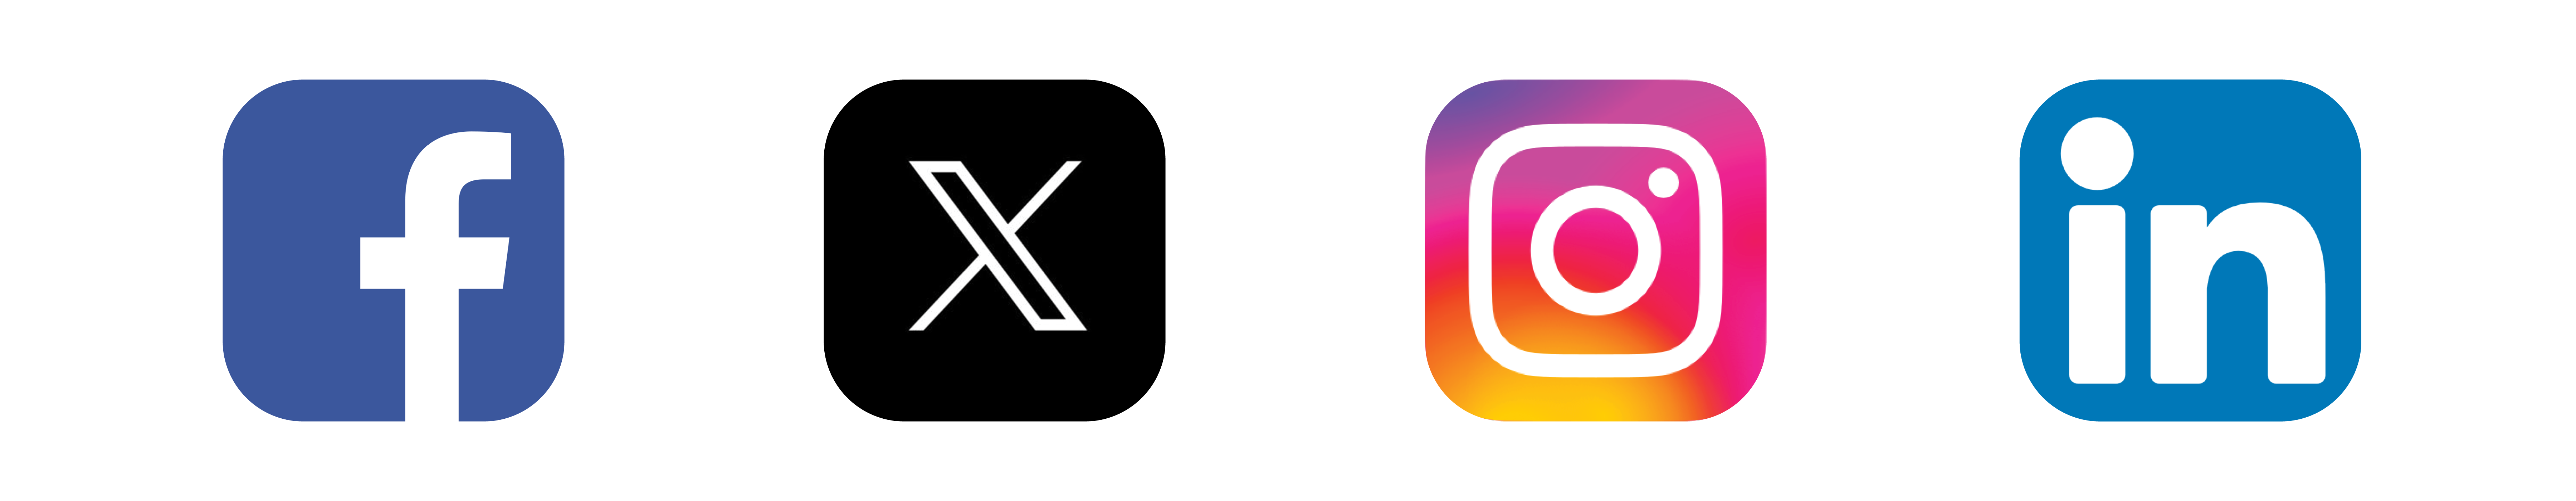 In order from left to right: Facebook, X, Instagram, and LinkedIn logos